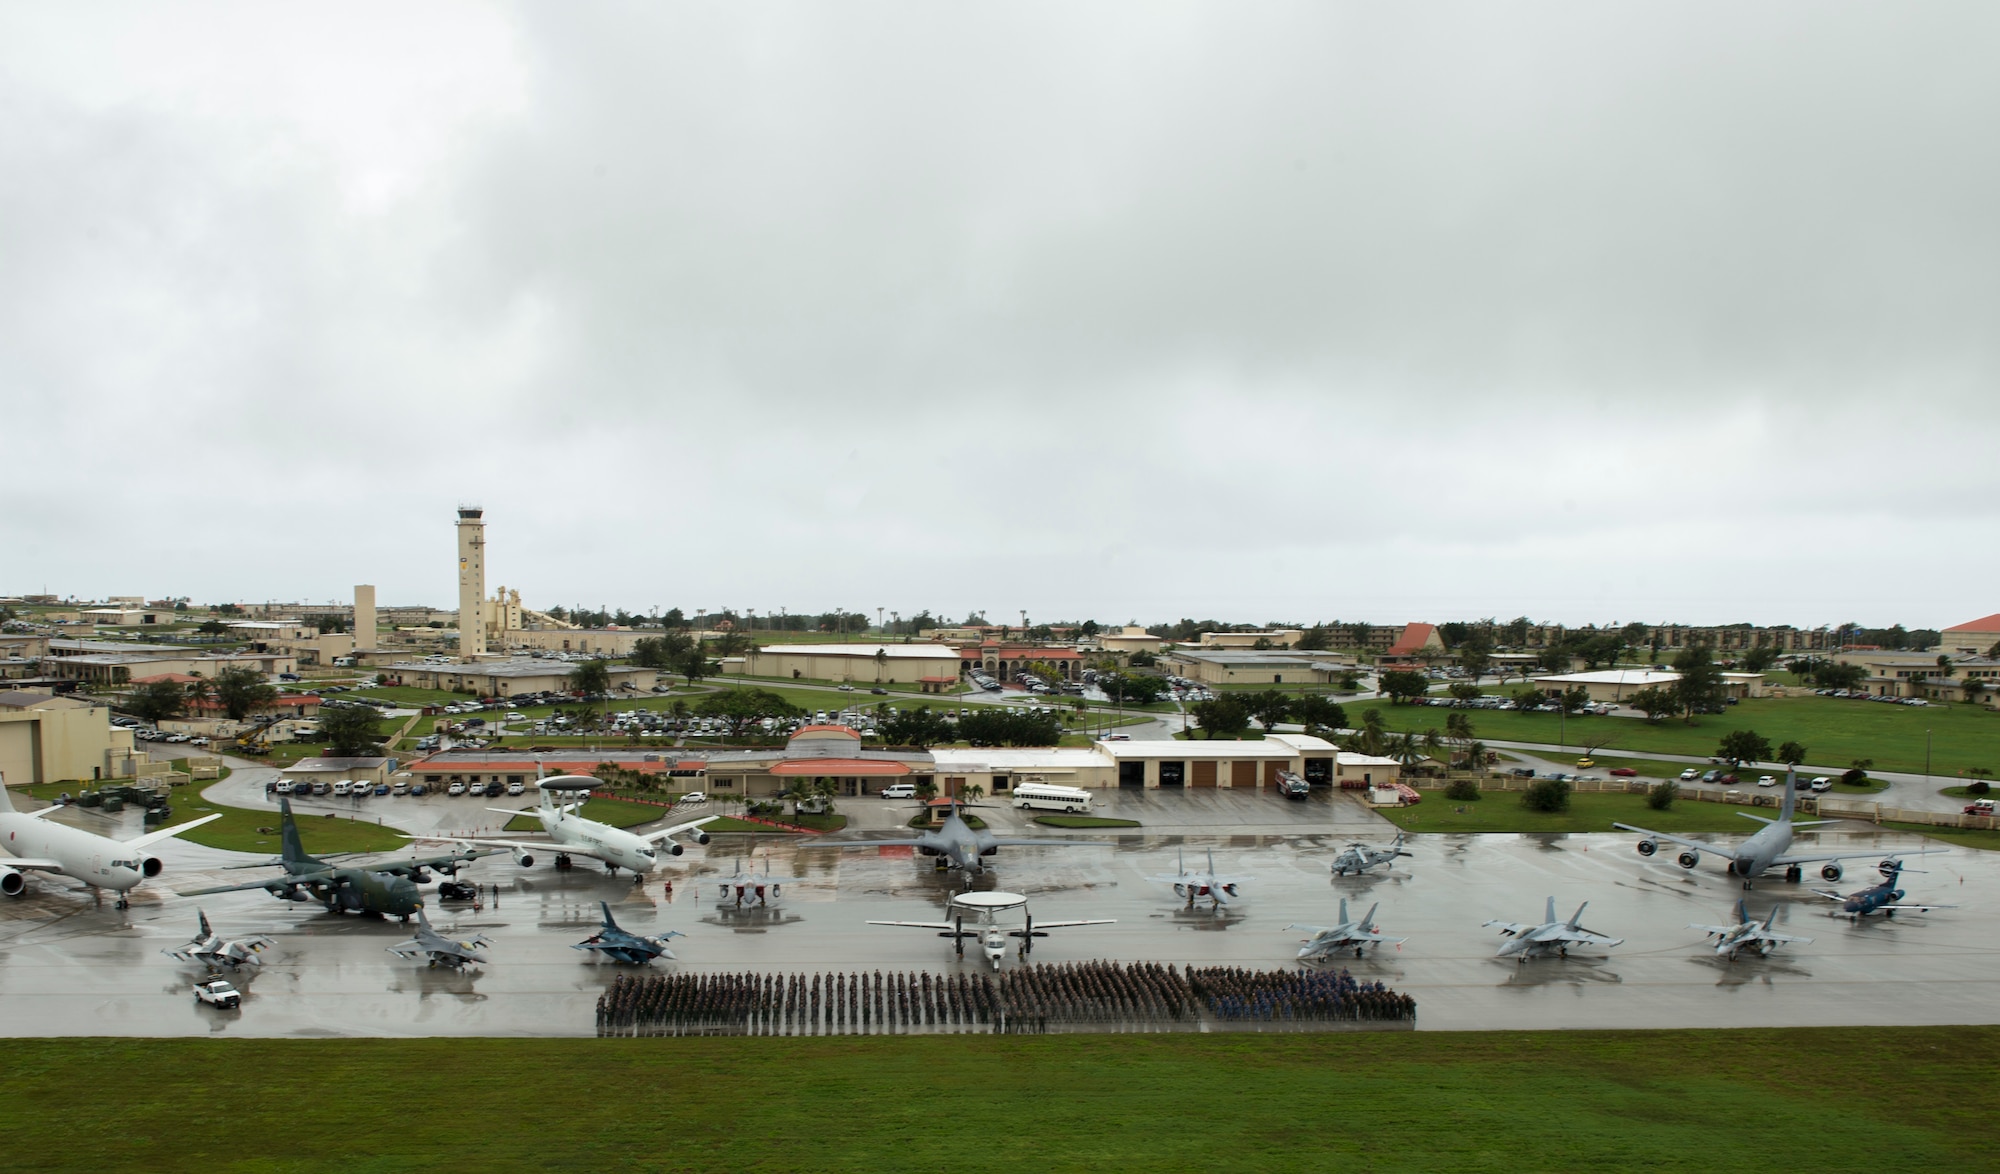 Exercise Cope North 17 participants on the Andersen Air Force Base, Guam flightline Feb. 15, 2017. The exercise includes 22 total flying units and more than 1,700 personnel from three countries and continues the growth of strong, interoperable relationships within the Indo-Asia-Pacific Region through integration of airborne and land-based command and control assets. (U.S. Air Force photo by Senior Airman Keith James)